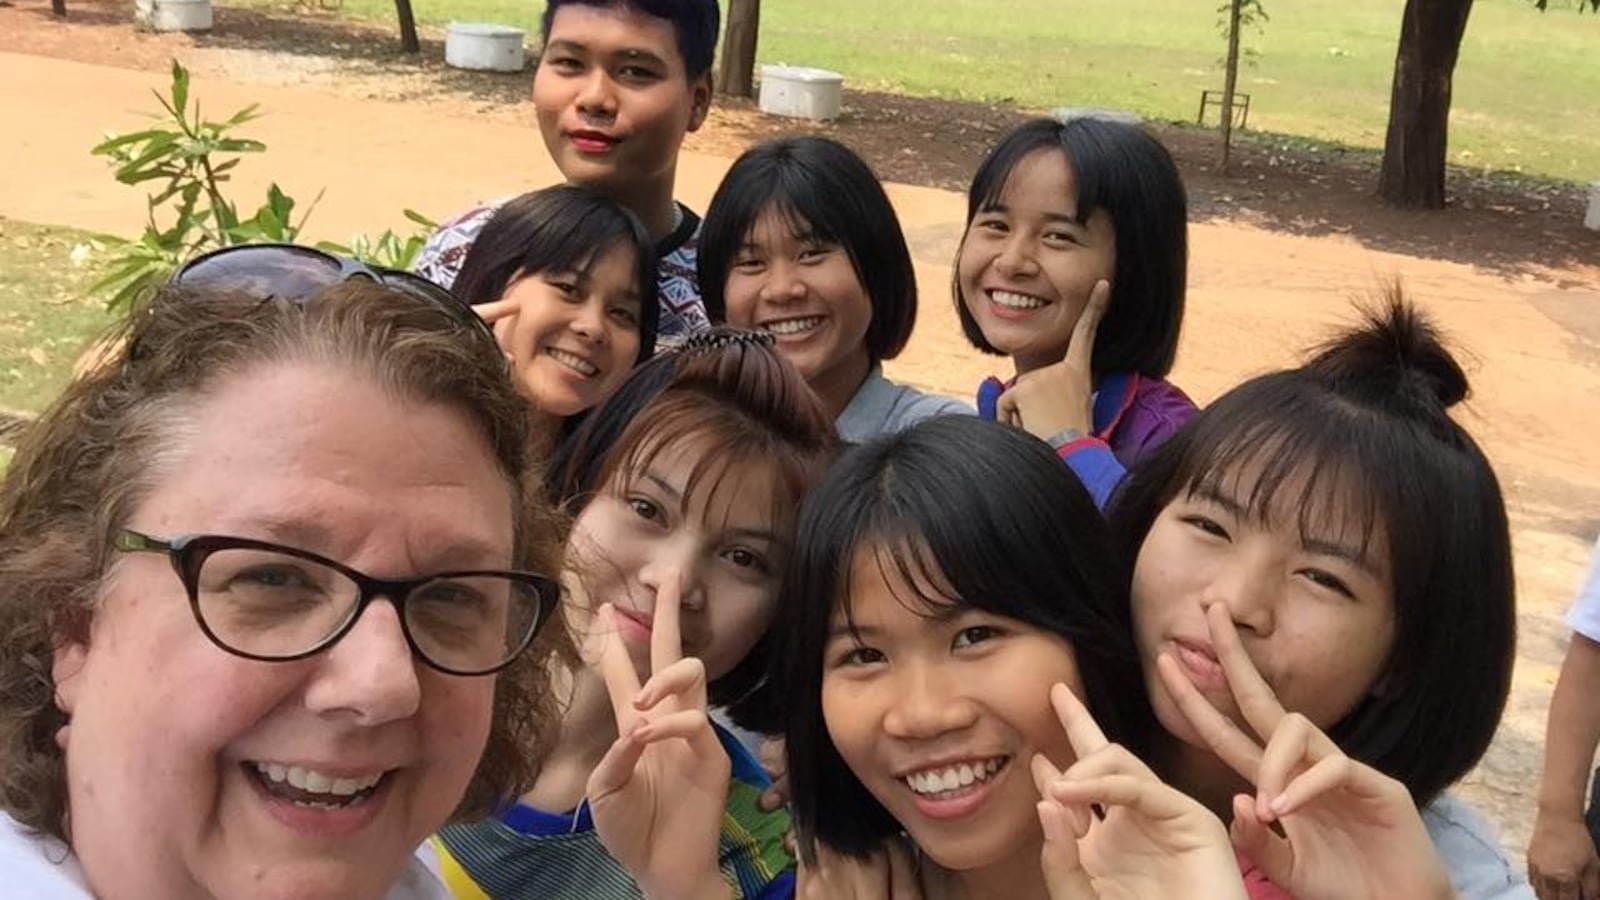 Kelly Bentley posted a photo of herself and Thai students on Facebook. The students hosted American teens enrolled in a study abroad program IPS could join.